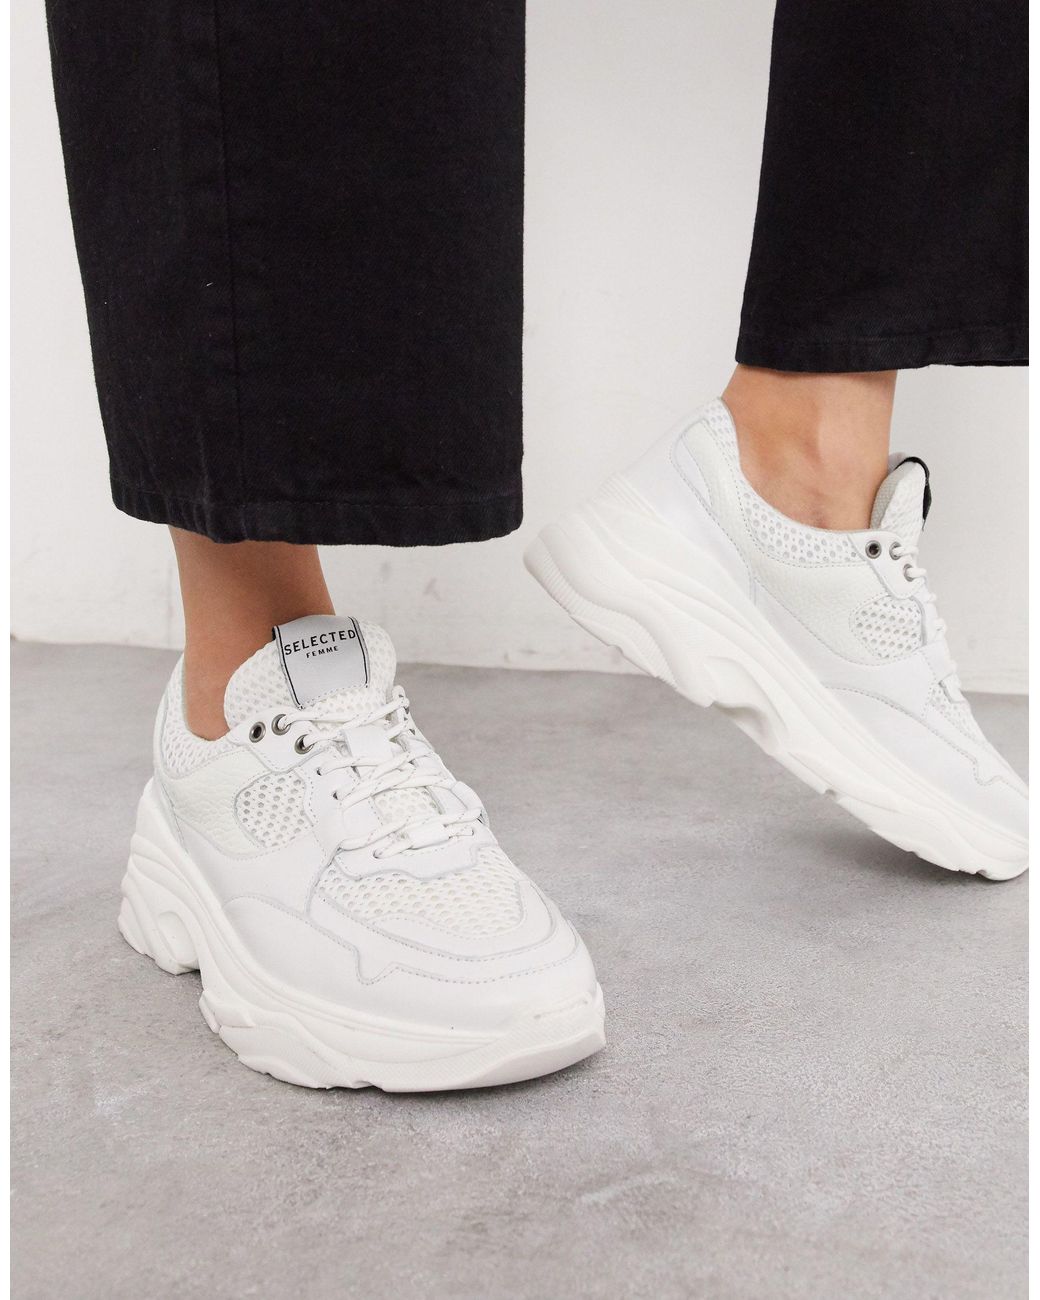 SELECTED Femme Chunky Leather Sneakers With Sports Mesh in White | Lyst  Australia